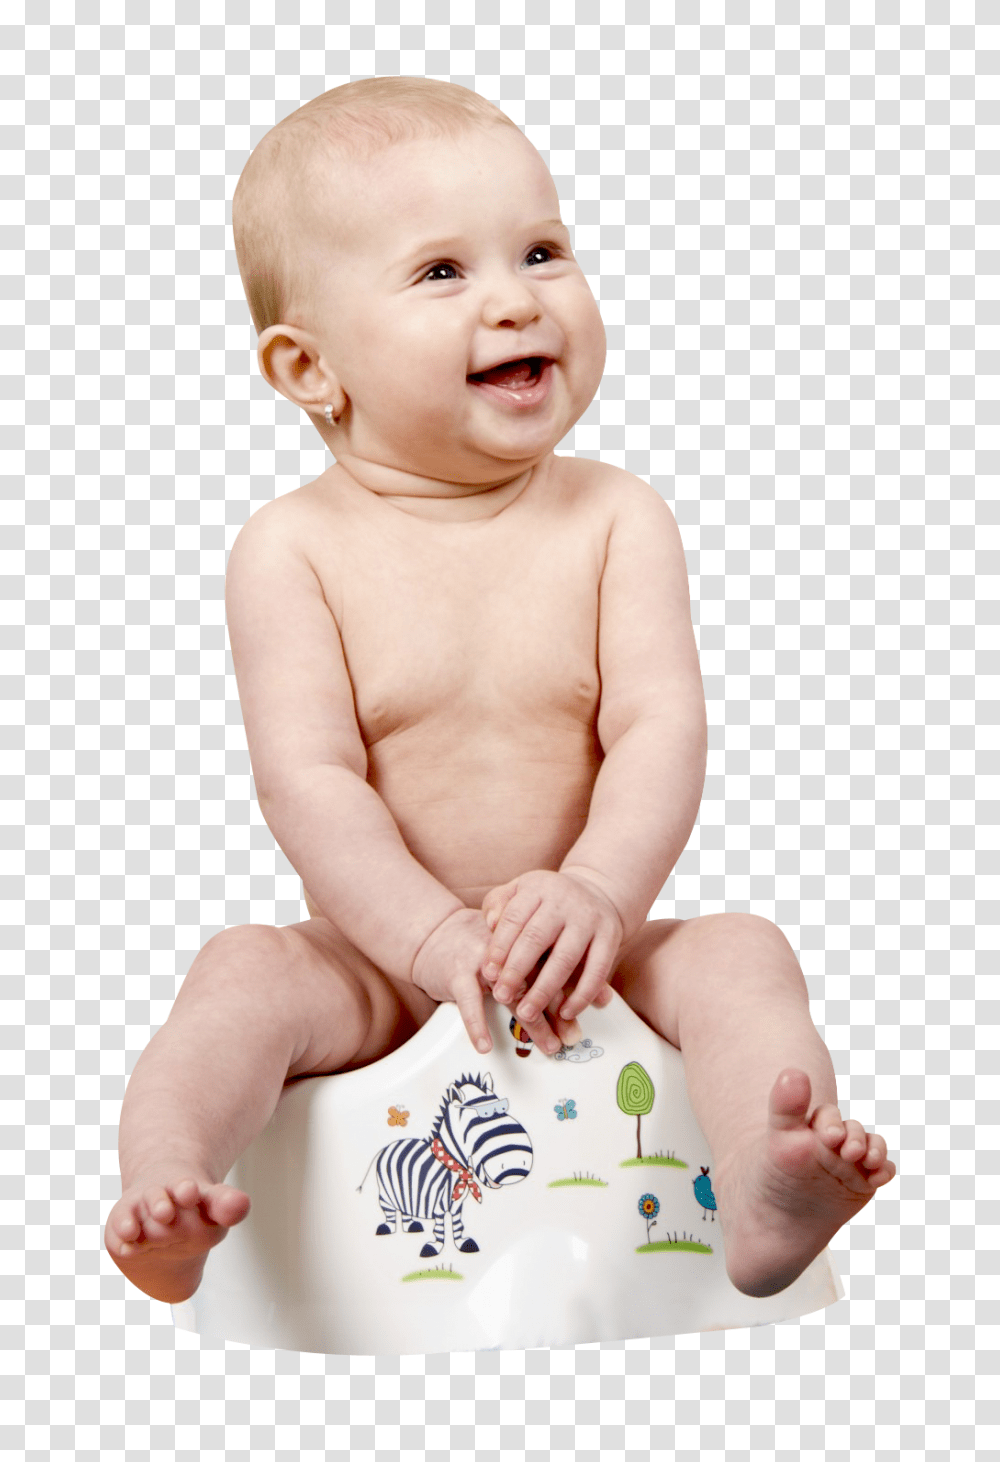 Happy Baby Image With Baby, Indoors, Room, Bathroom, Potty Transparent Png